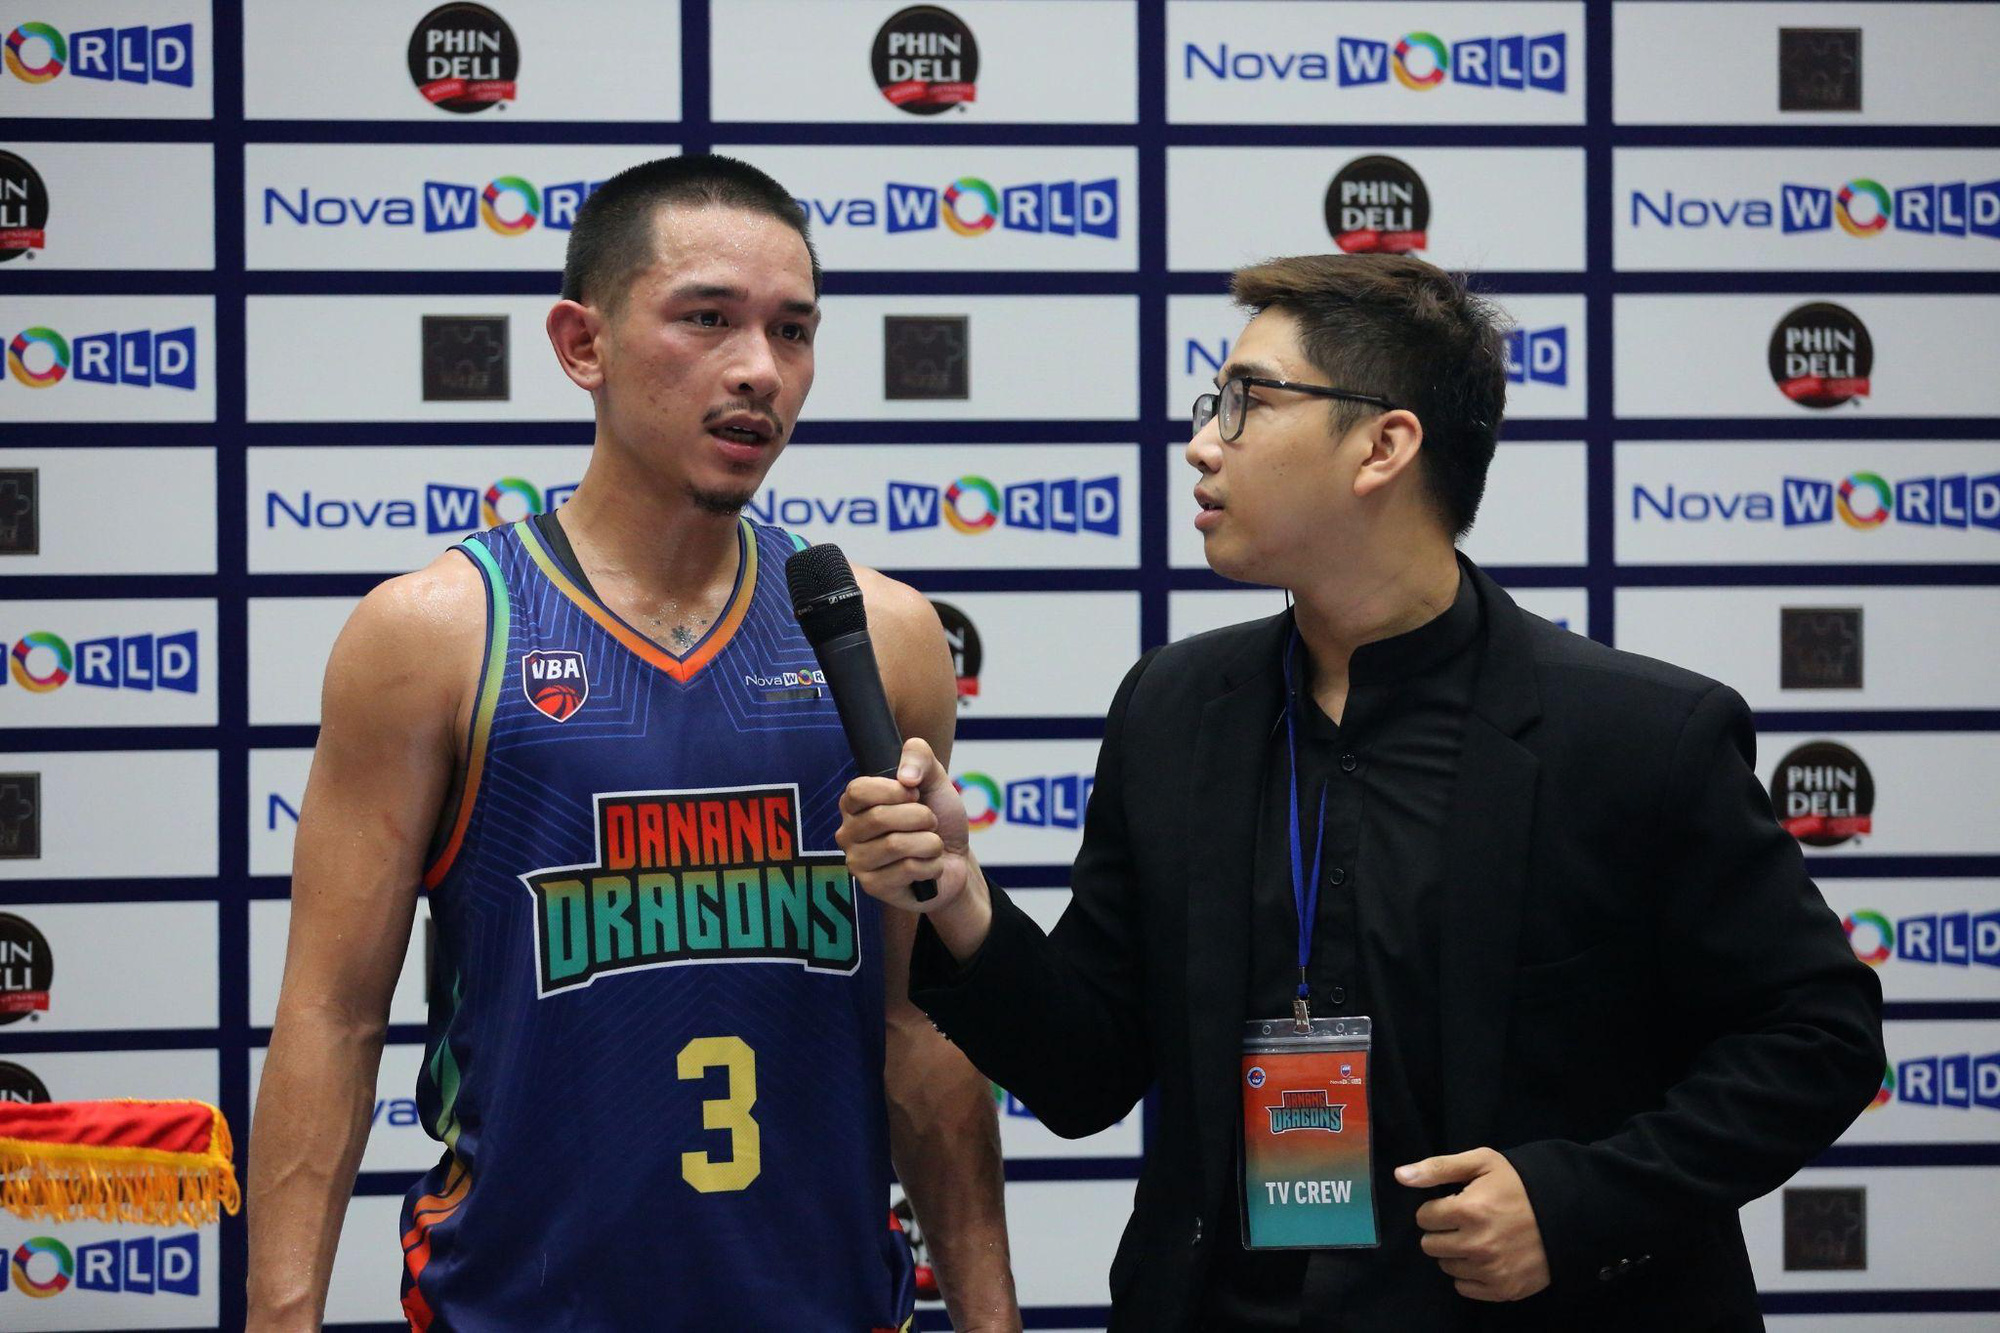 Michael Soy (L) of the Danang Dragons is interviewed after a 2022 VBA game. Photo: VBA